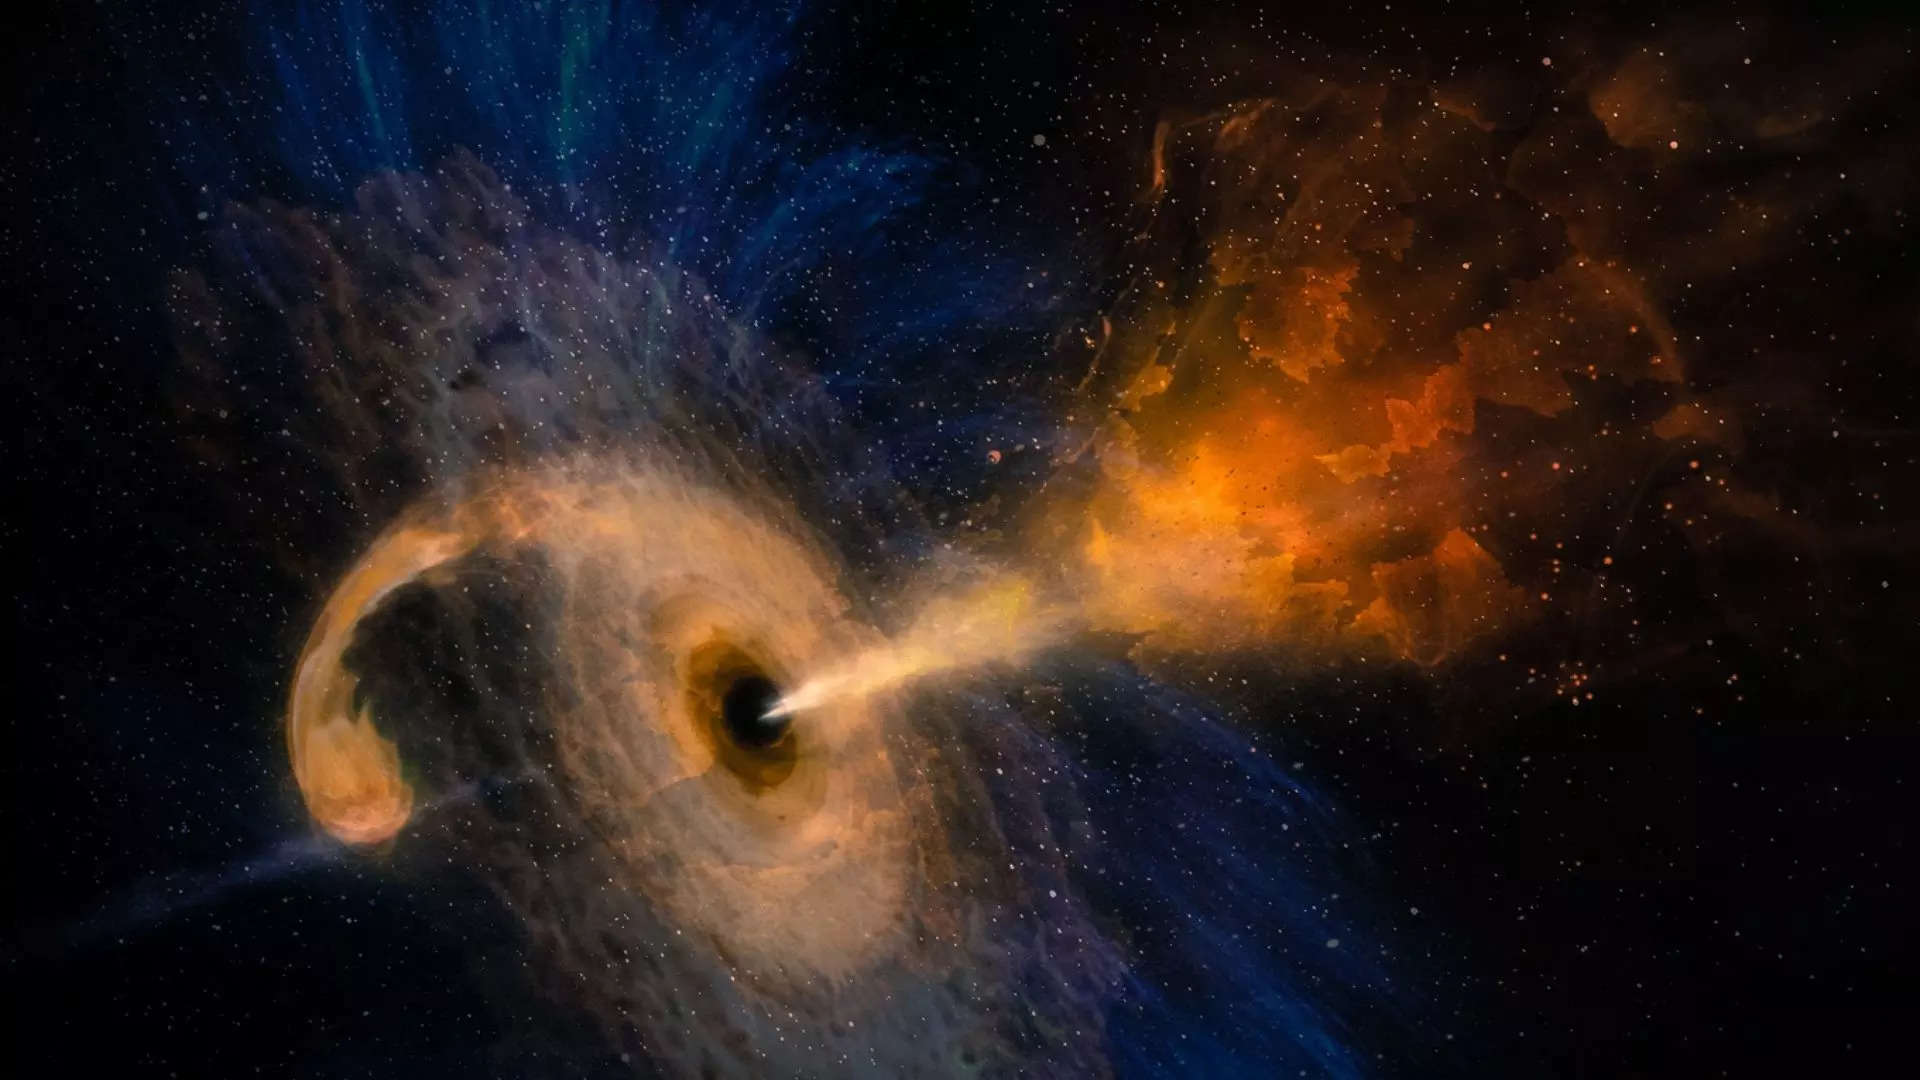 Illustration of a black hole's gravity tugging on an interstellar cloud